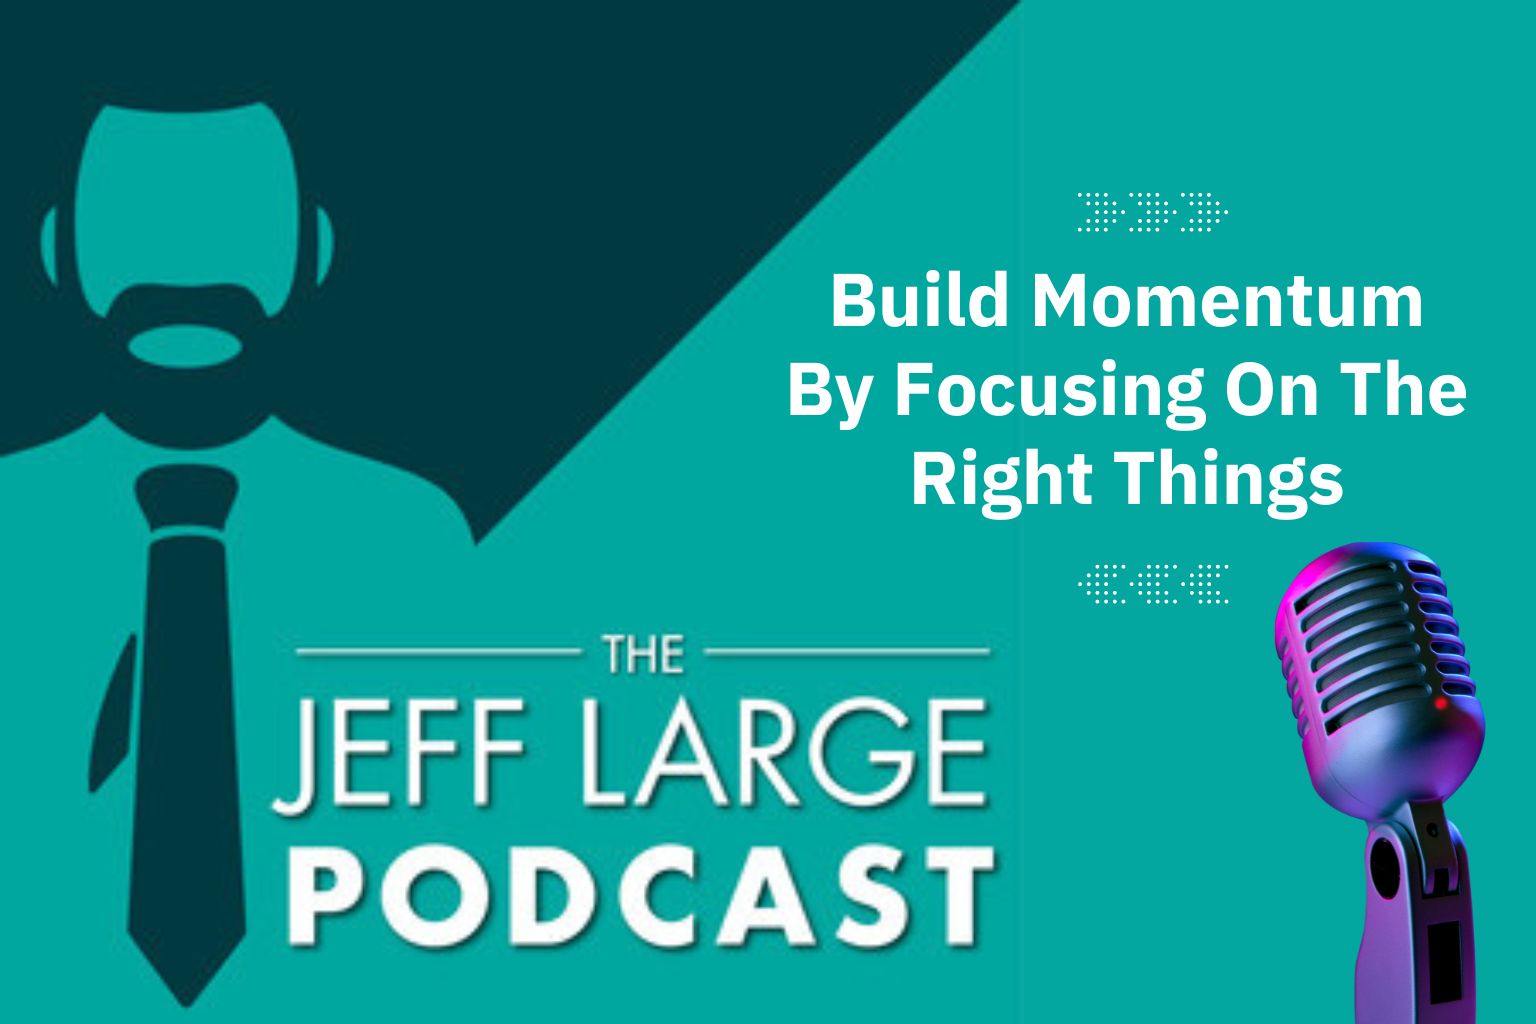 Build Momentum By Focusing On The Right Things